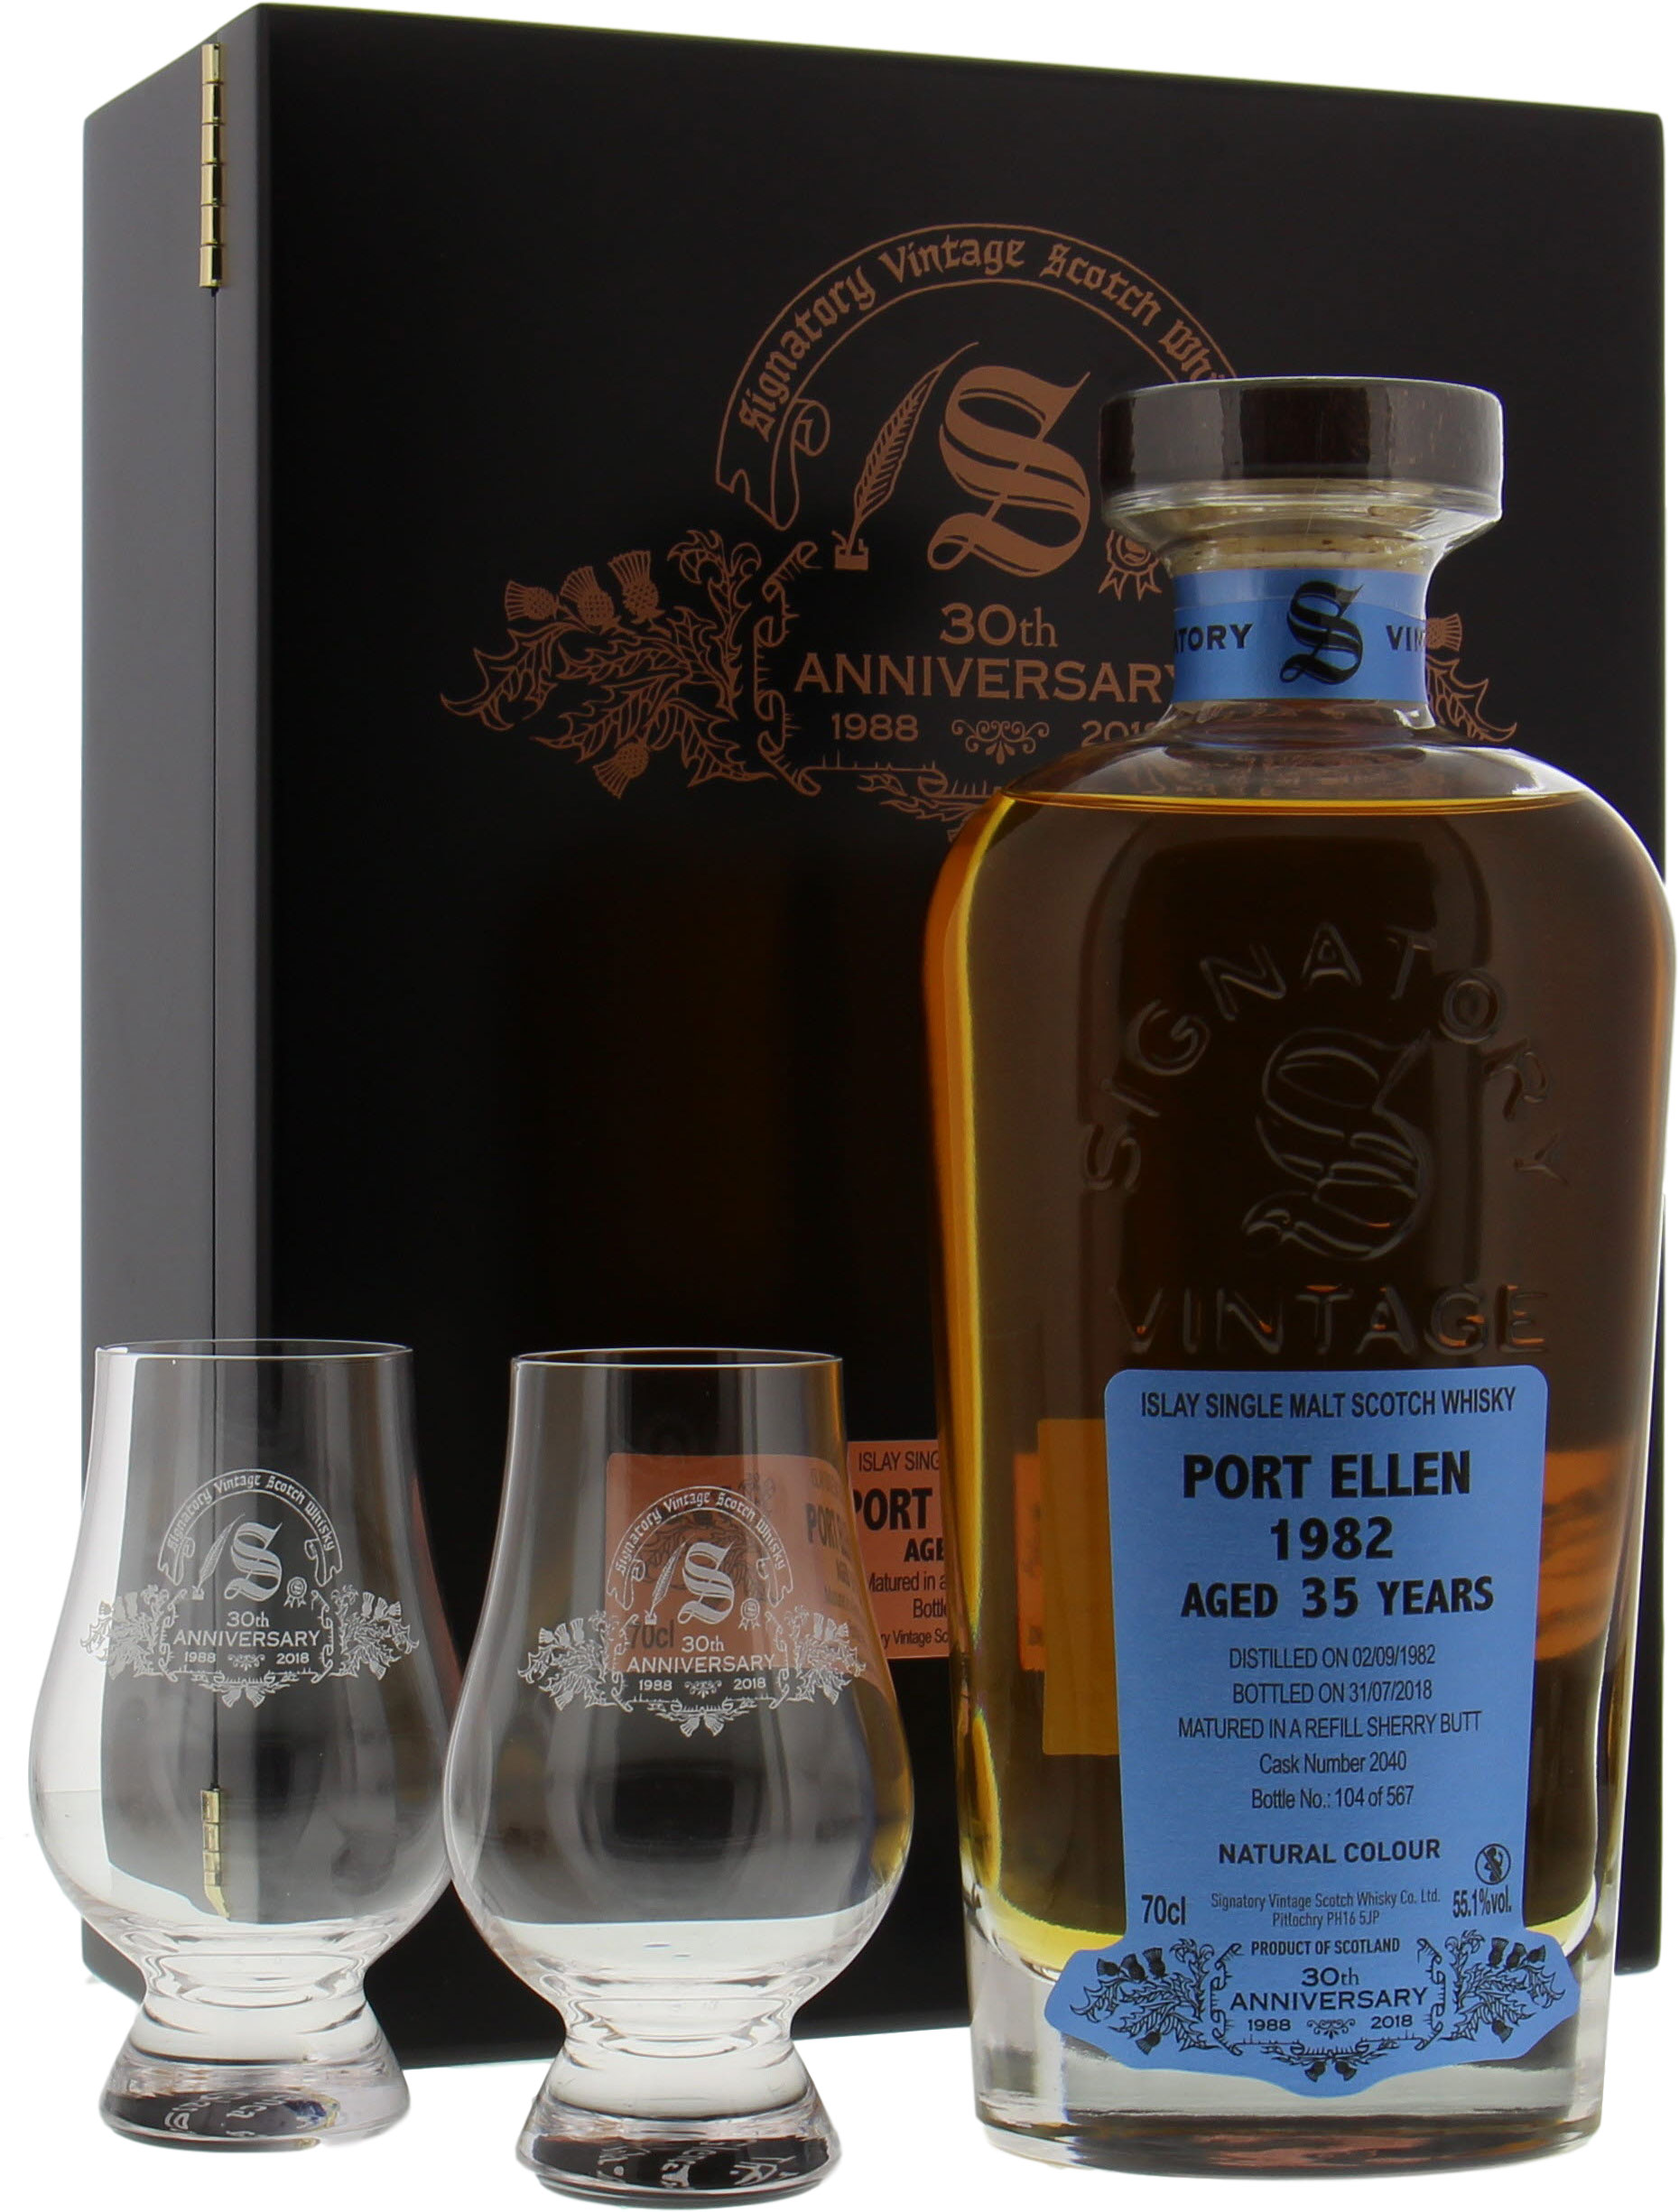 Port Ellen - 35 Years Old Signatory 30th Anniversary Cask 2040 55.1% 1982 In Original Wooden Container